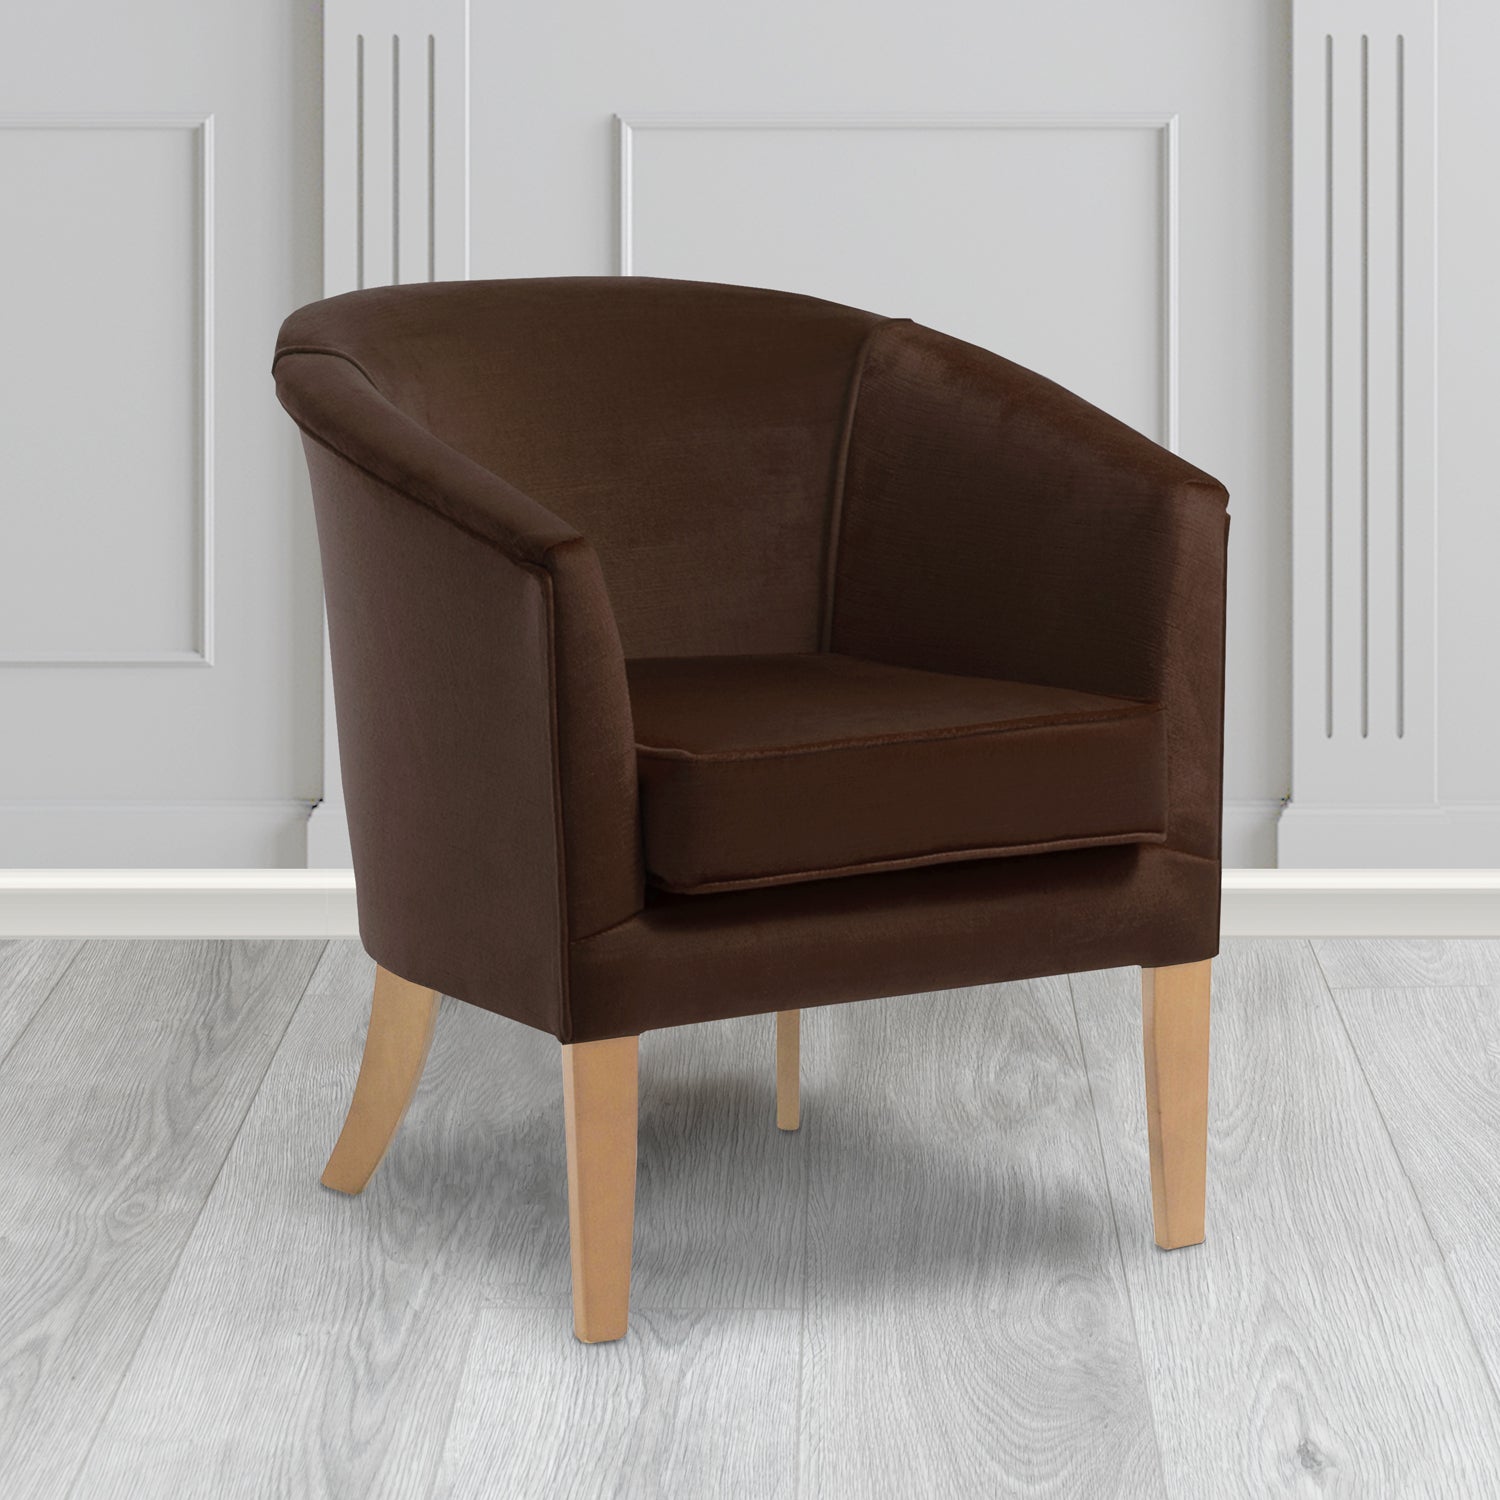 Jazz Tub Chair in Noble 702 Chocolate Crib 5 Velvet Fabric - Water Resistant - The Tub Chair Shop